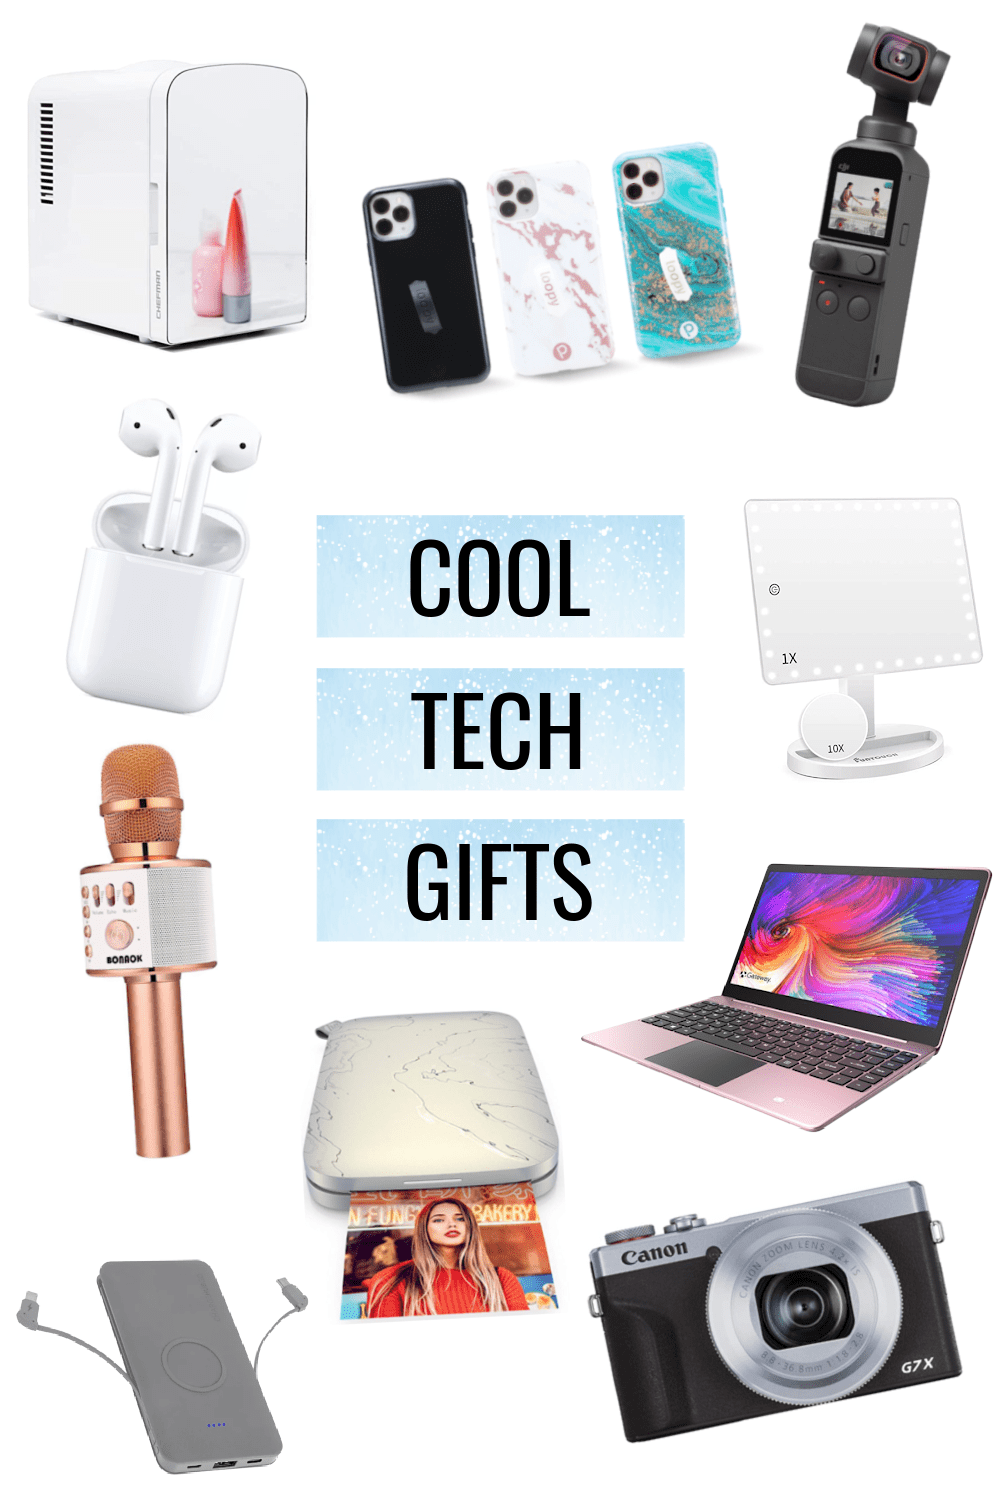 Top 8 Cool Tech Gifts for Girlfriend Smart Watch Digital Photo Frame and  More  Guiding Tech